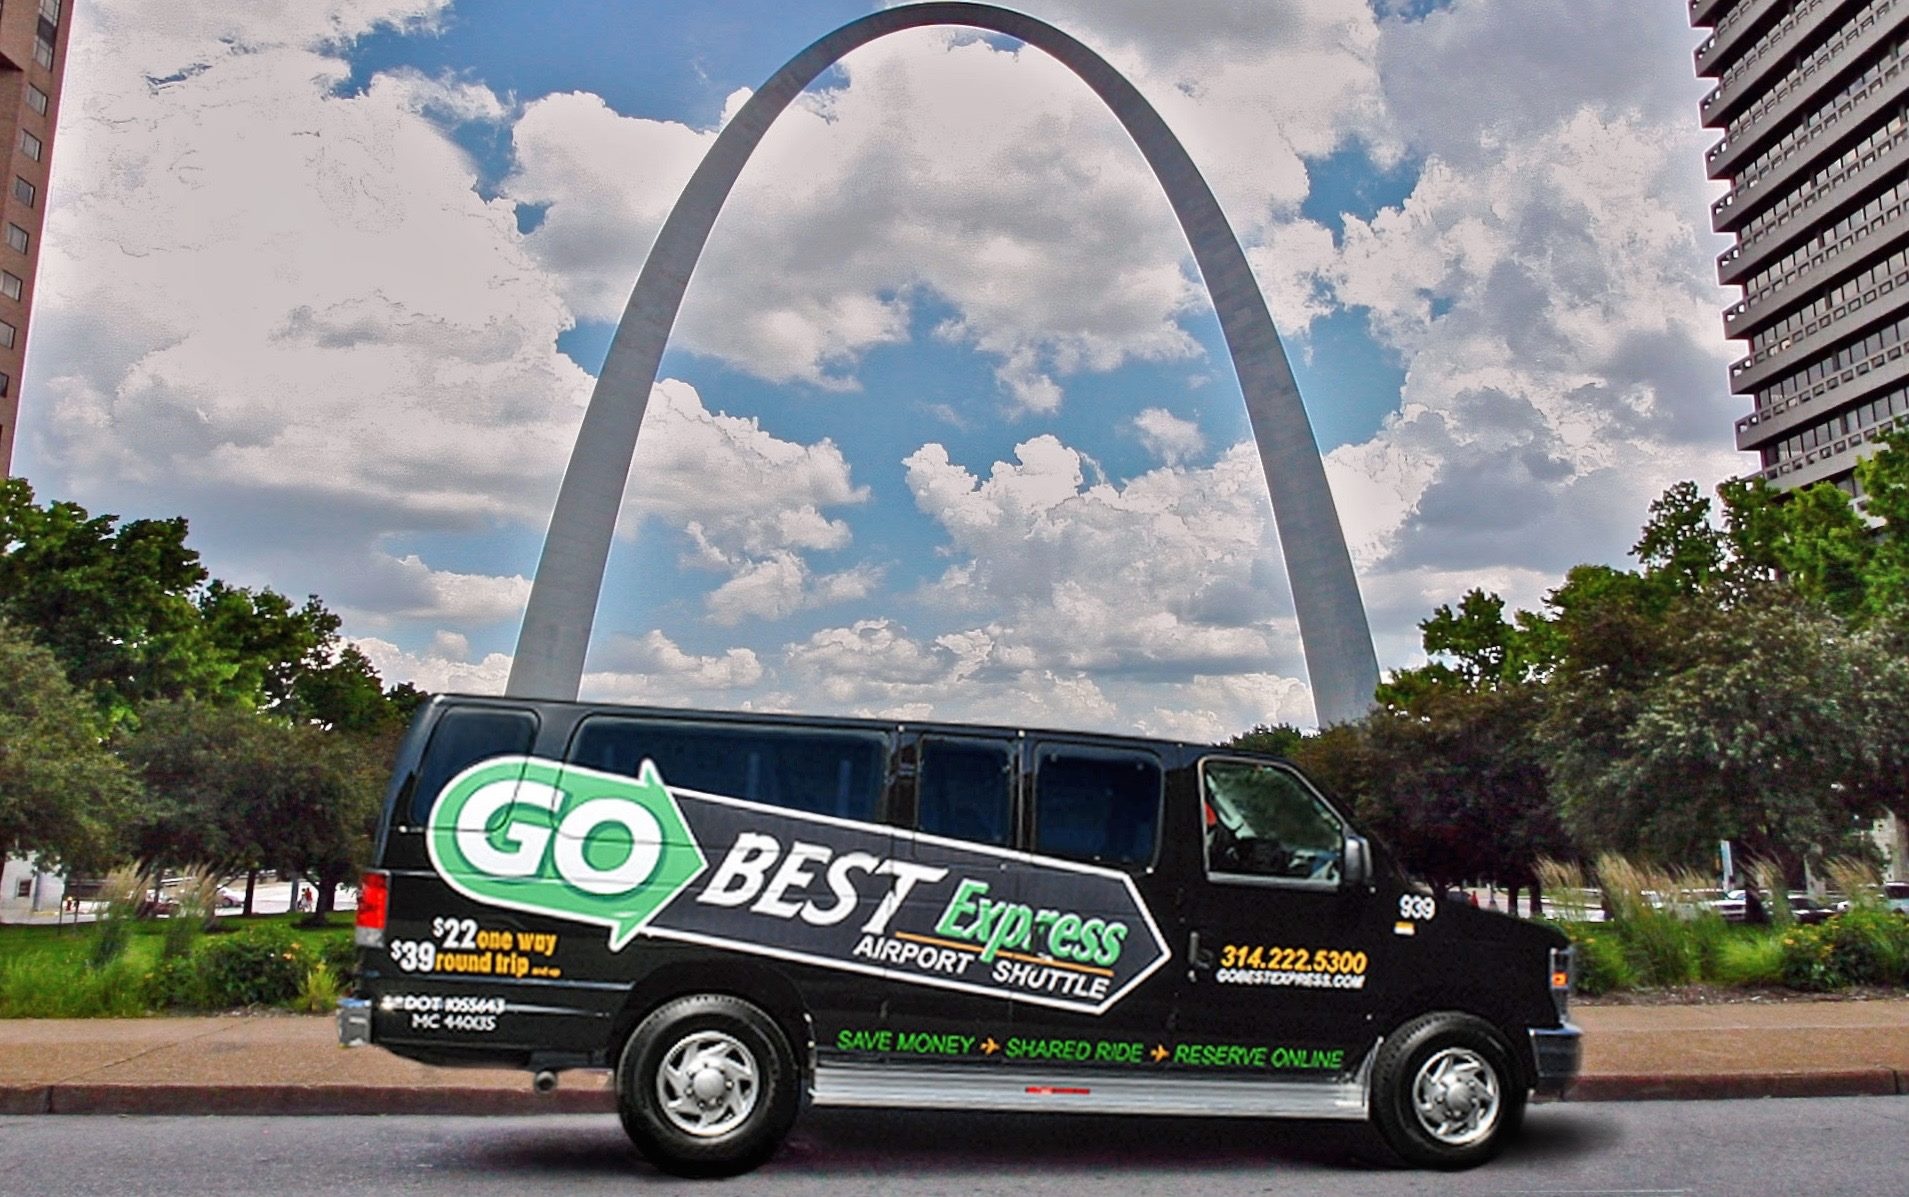 go airport shuttle chicago reviews